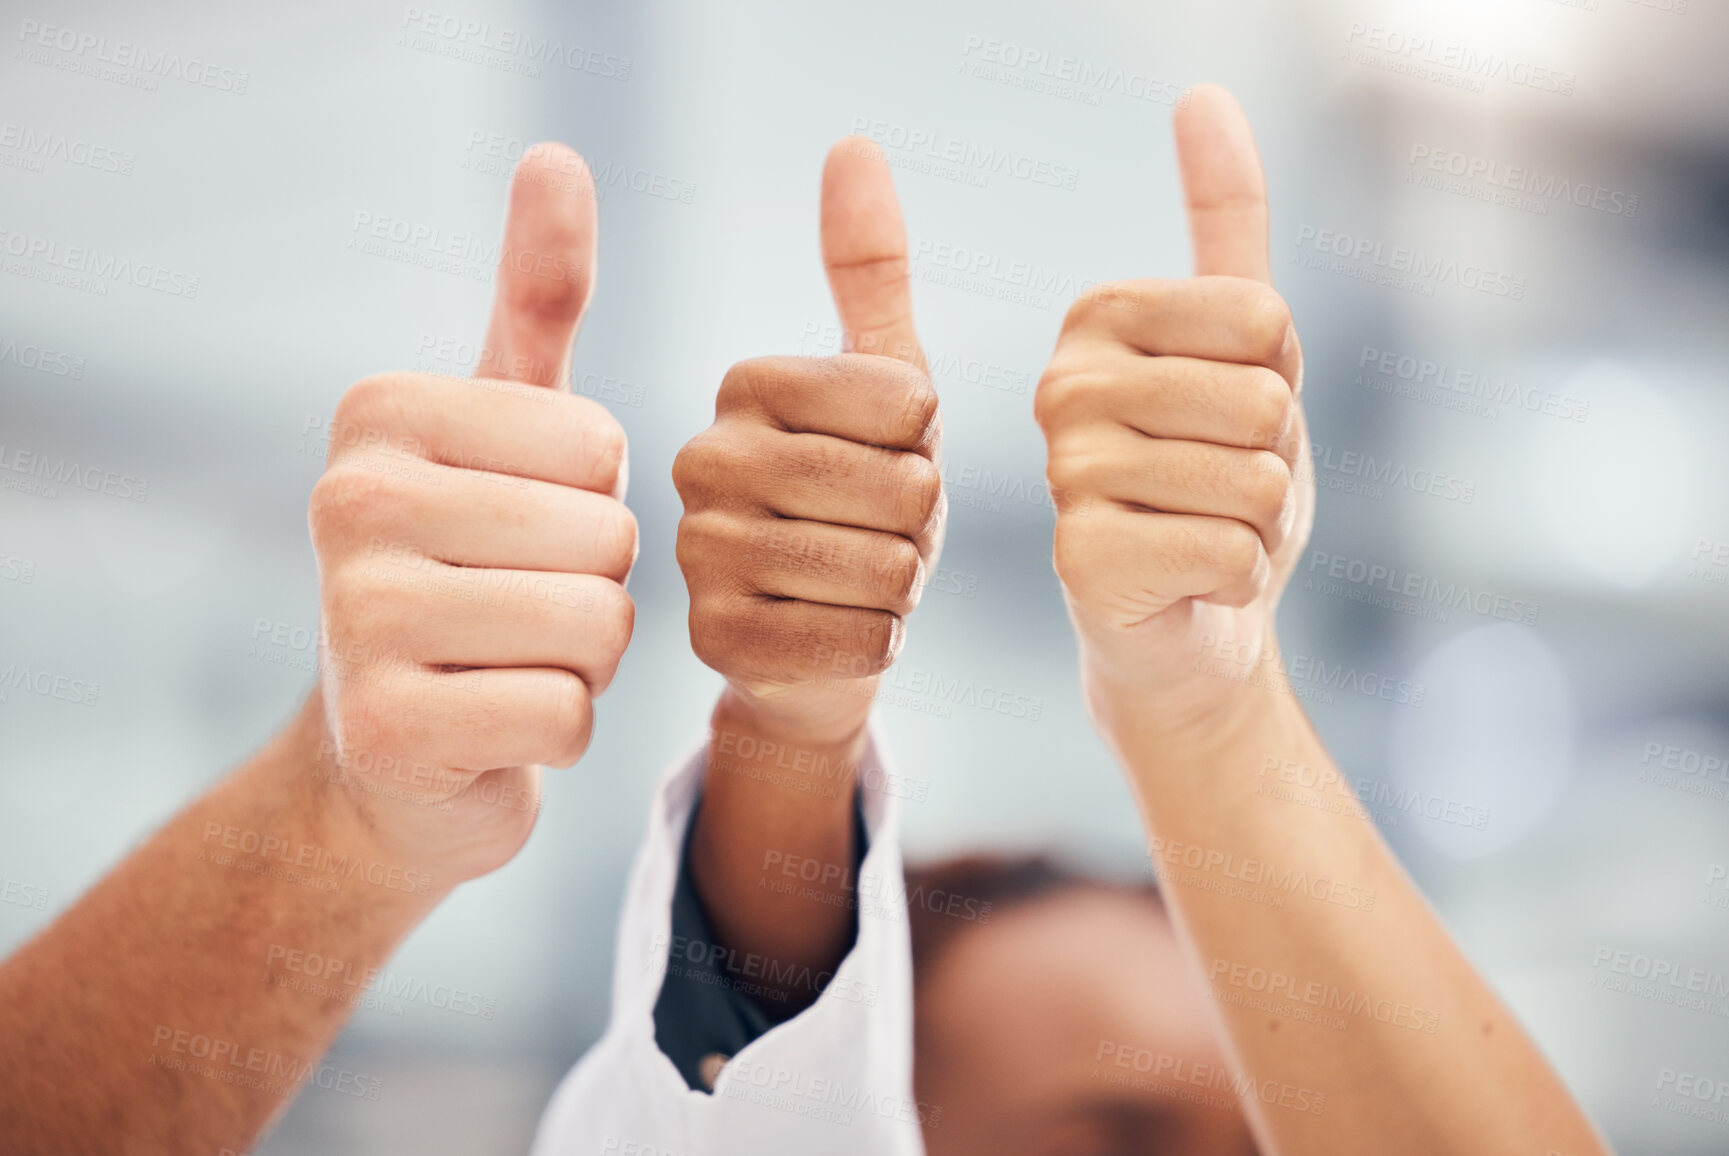 Buy stock photo Yes, success or thank you thumbs up hand sign of workers happy about work goal or target completion. Winner, teamwork agreement or team win of business people with diversity and motivation together